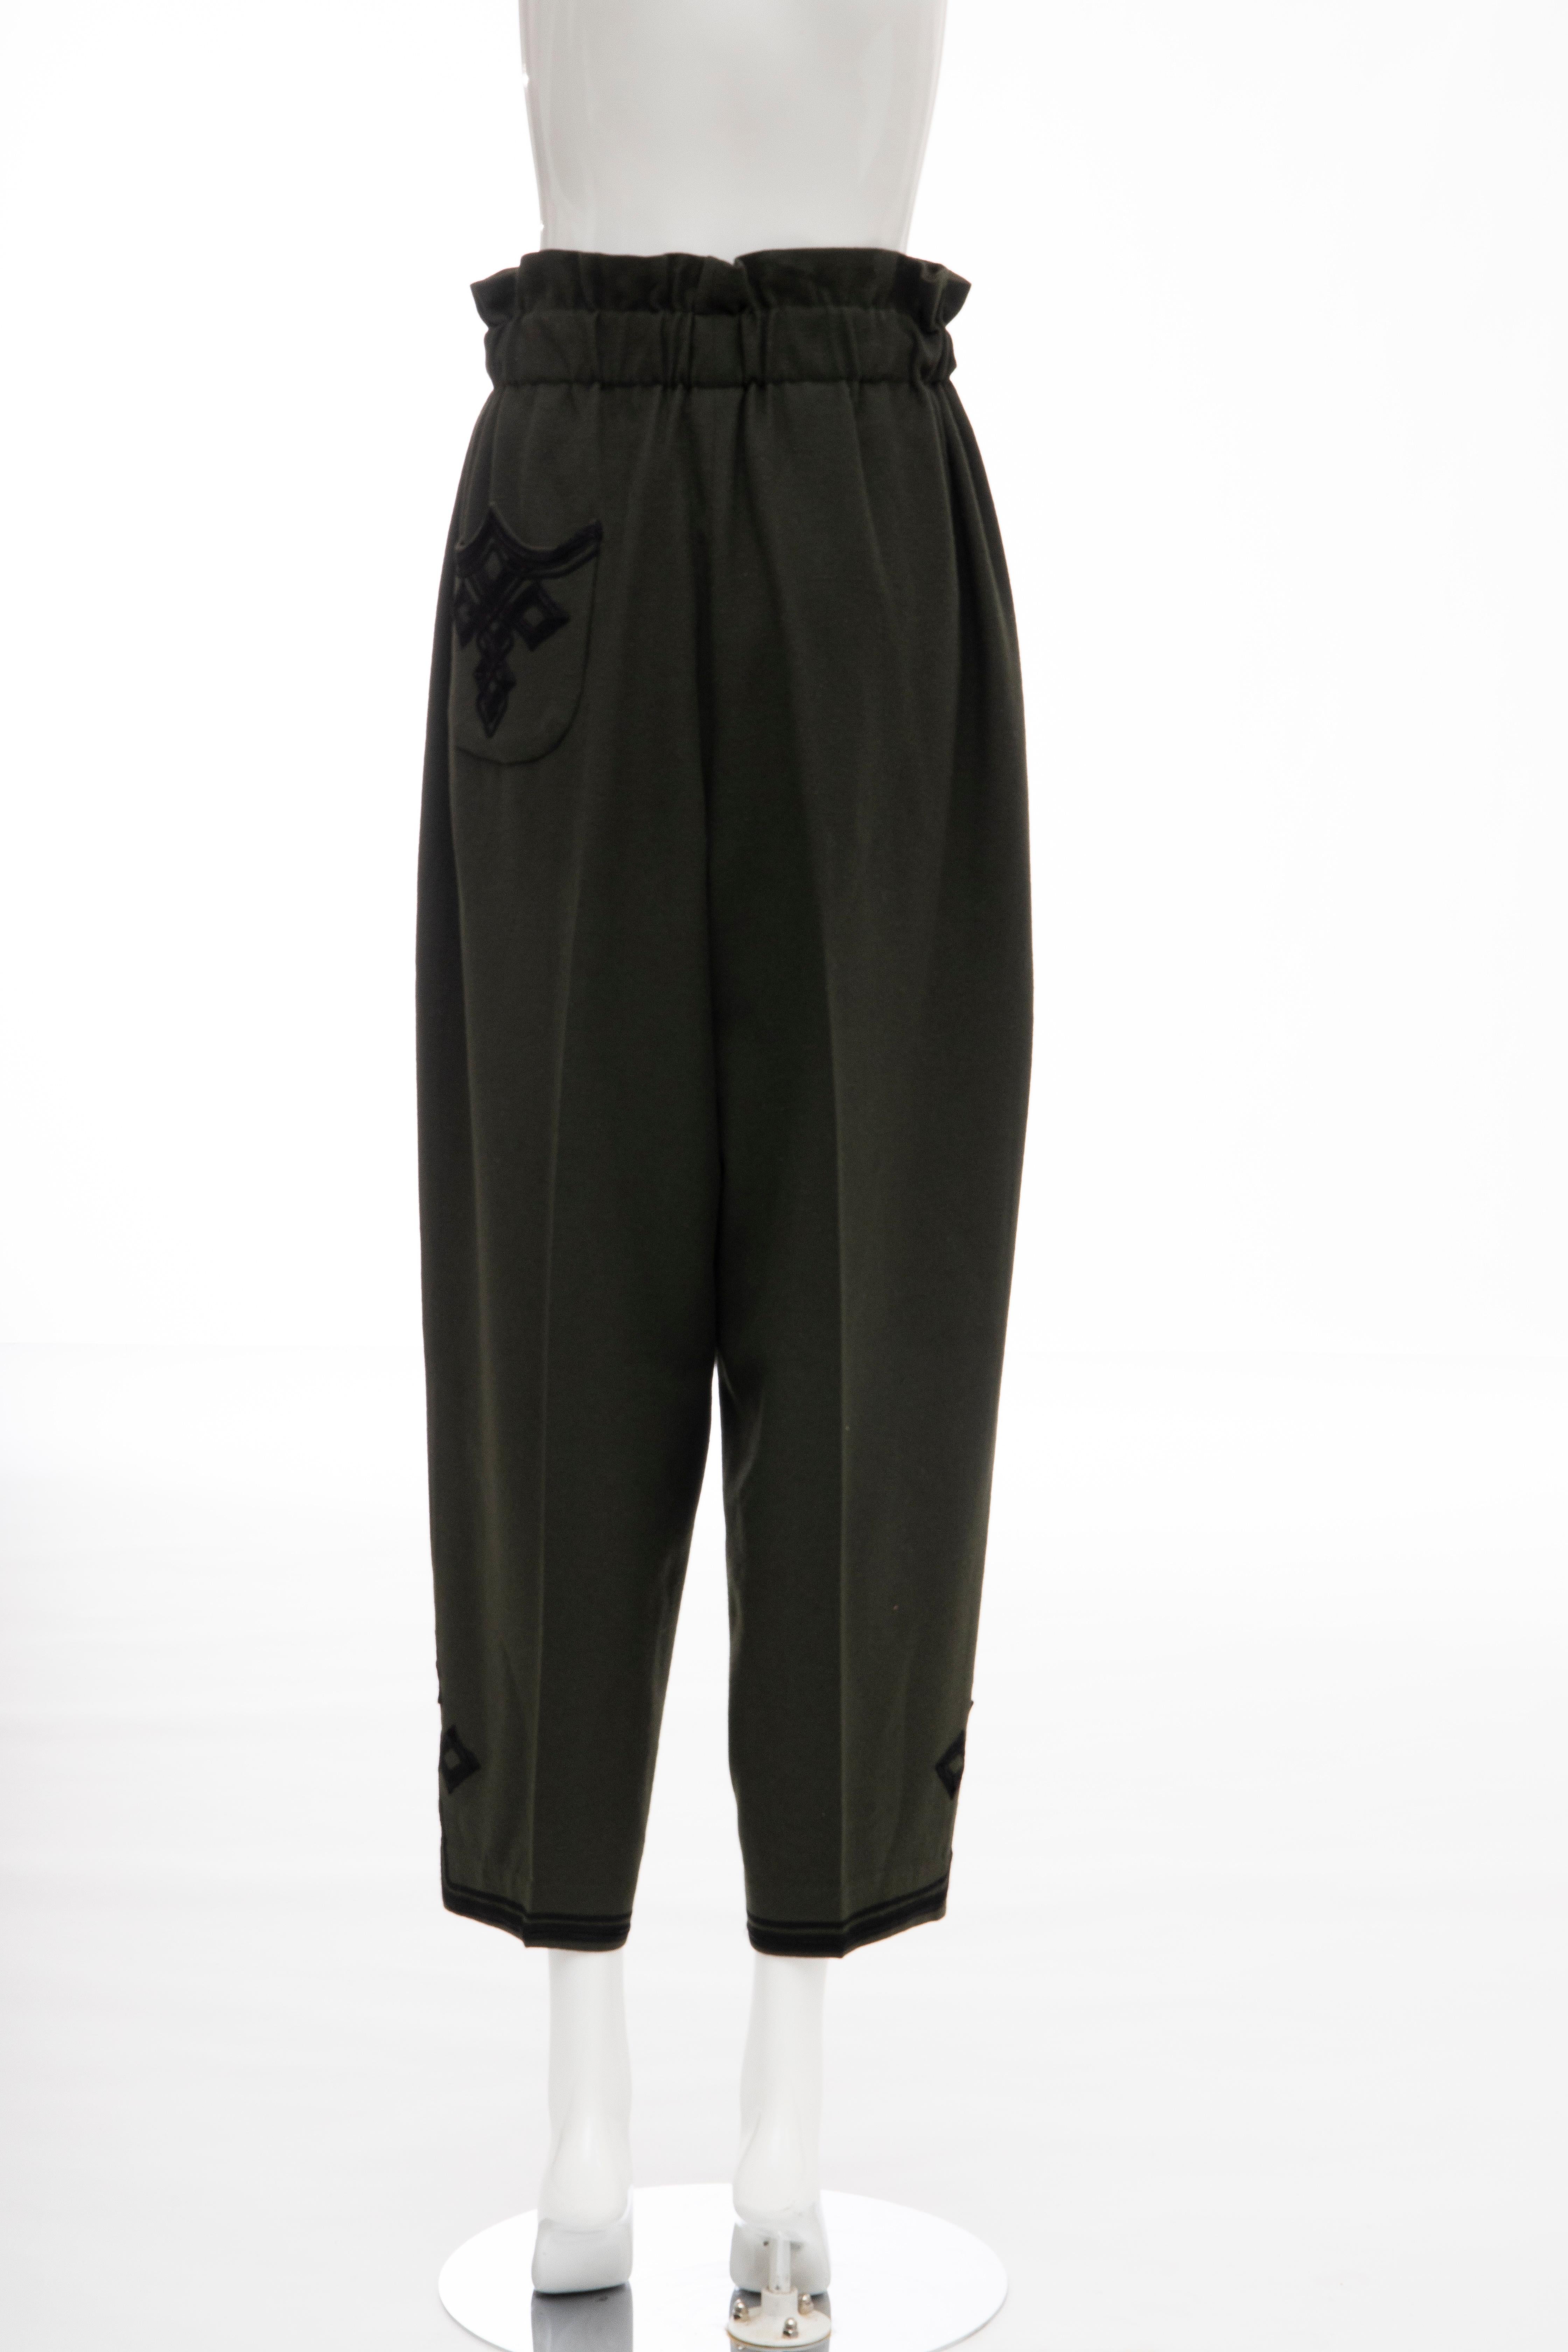 Women's Matsuda Nicole Tokyo Japan Olive Green Wool Embroidered Pants, Circa: 1990's For Sale